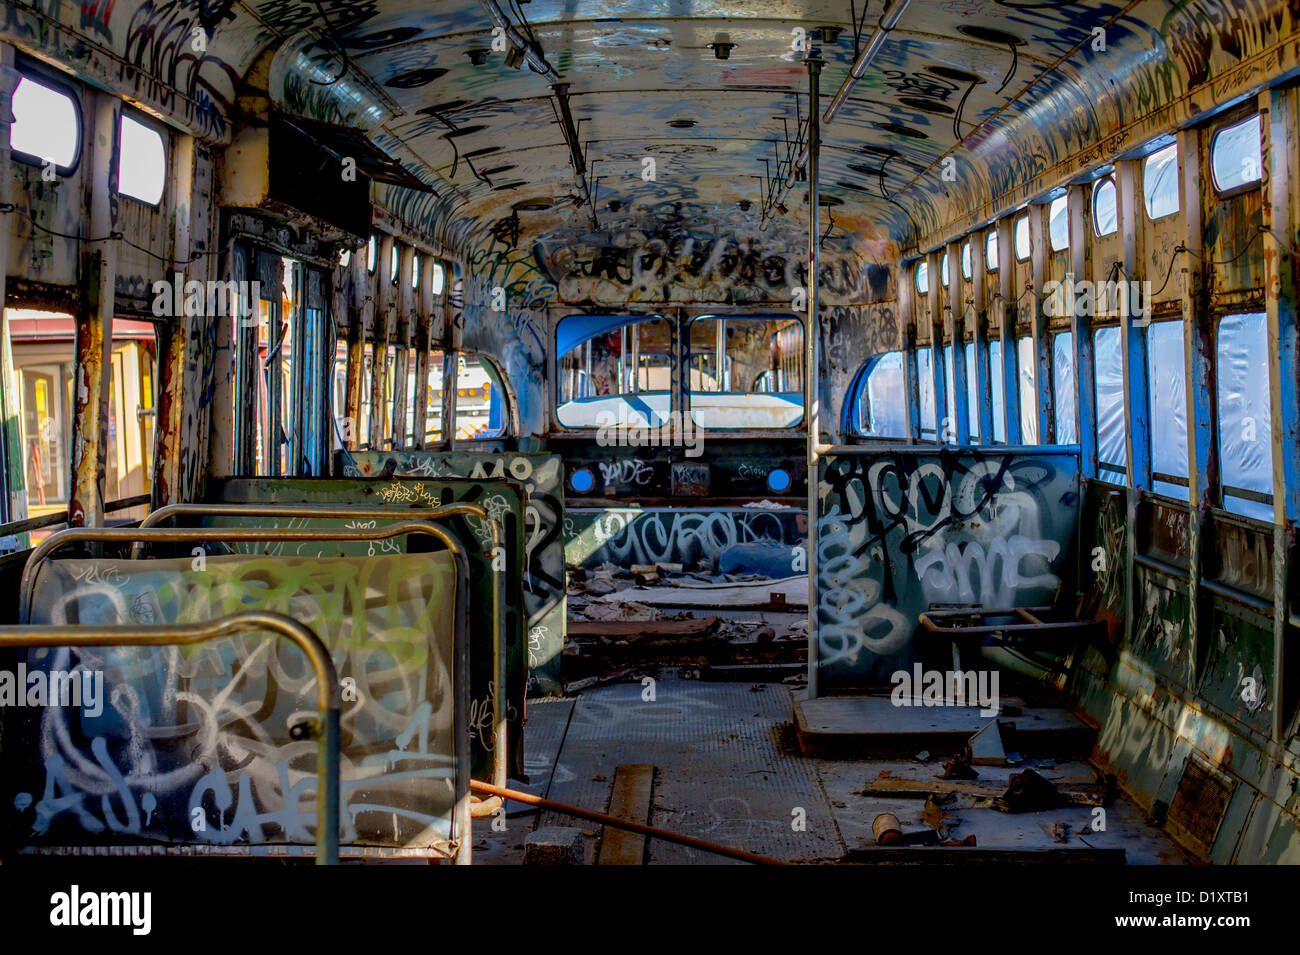 Interior of a vandalized street car Stock Photo